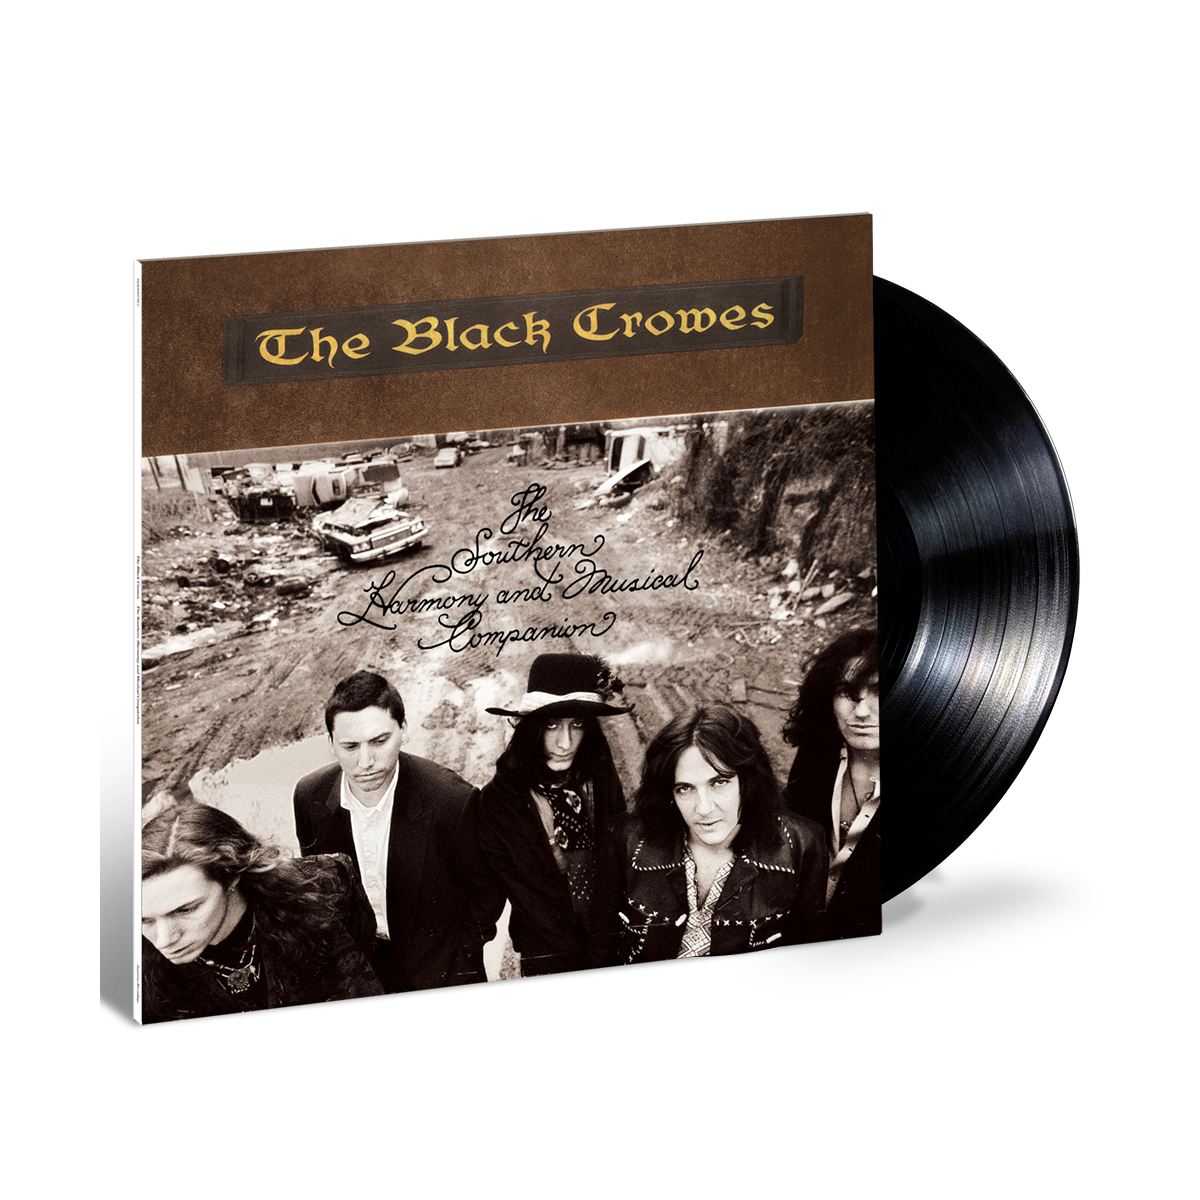 The Black Crowes - The Southern Harmony And Musical Companion: Vinyl LP -  Sound of Vinyl